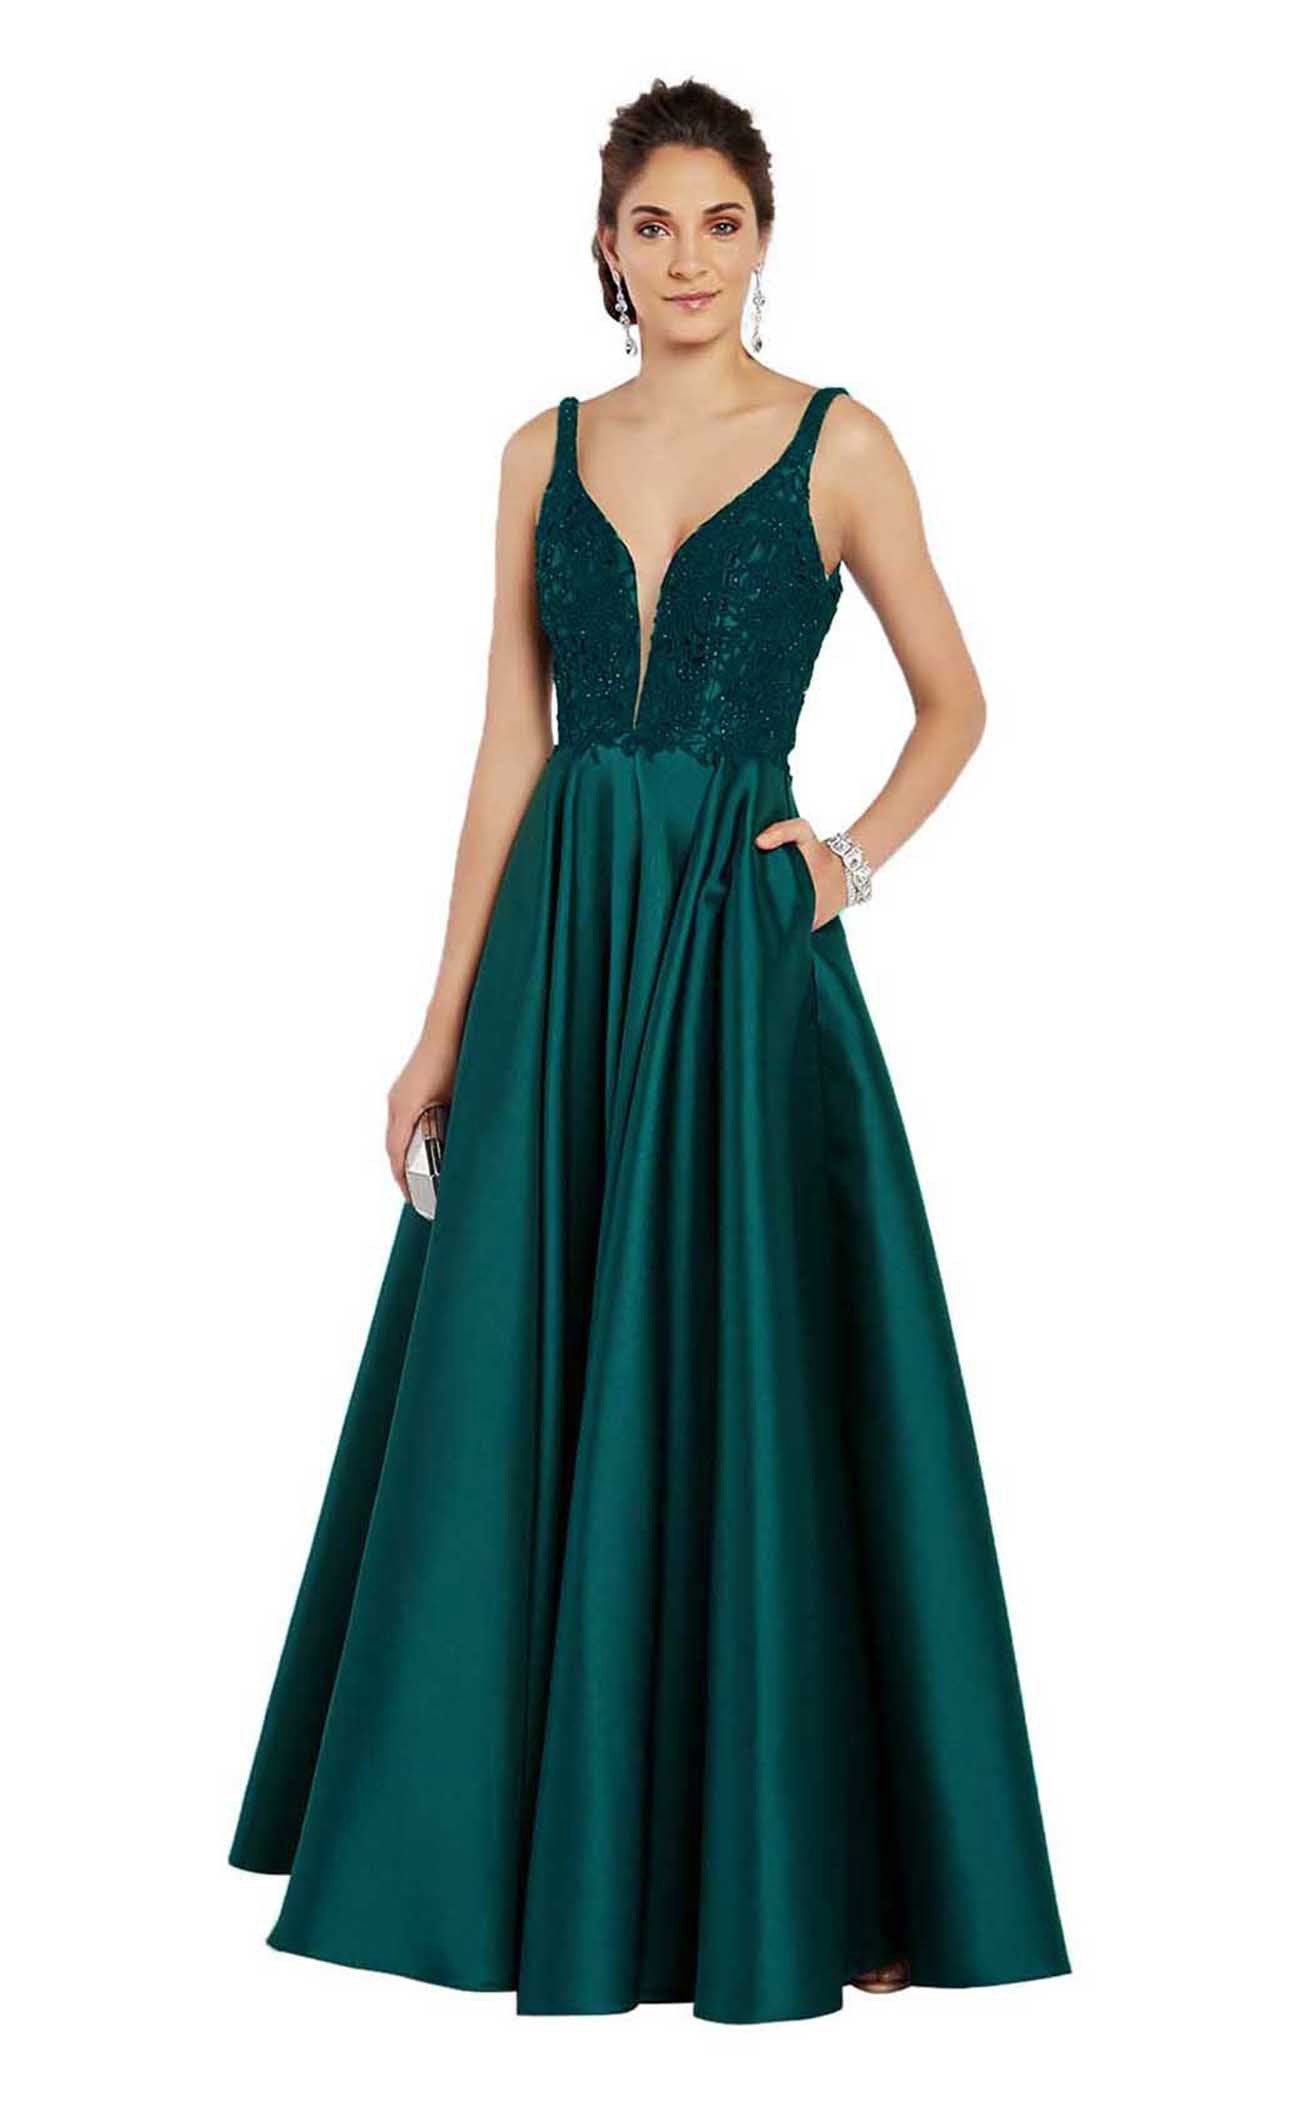 Alyce Paris - 60332 Plunging Scooped Back Lace A-Line Gown in Green